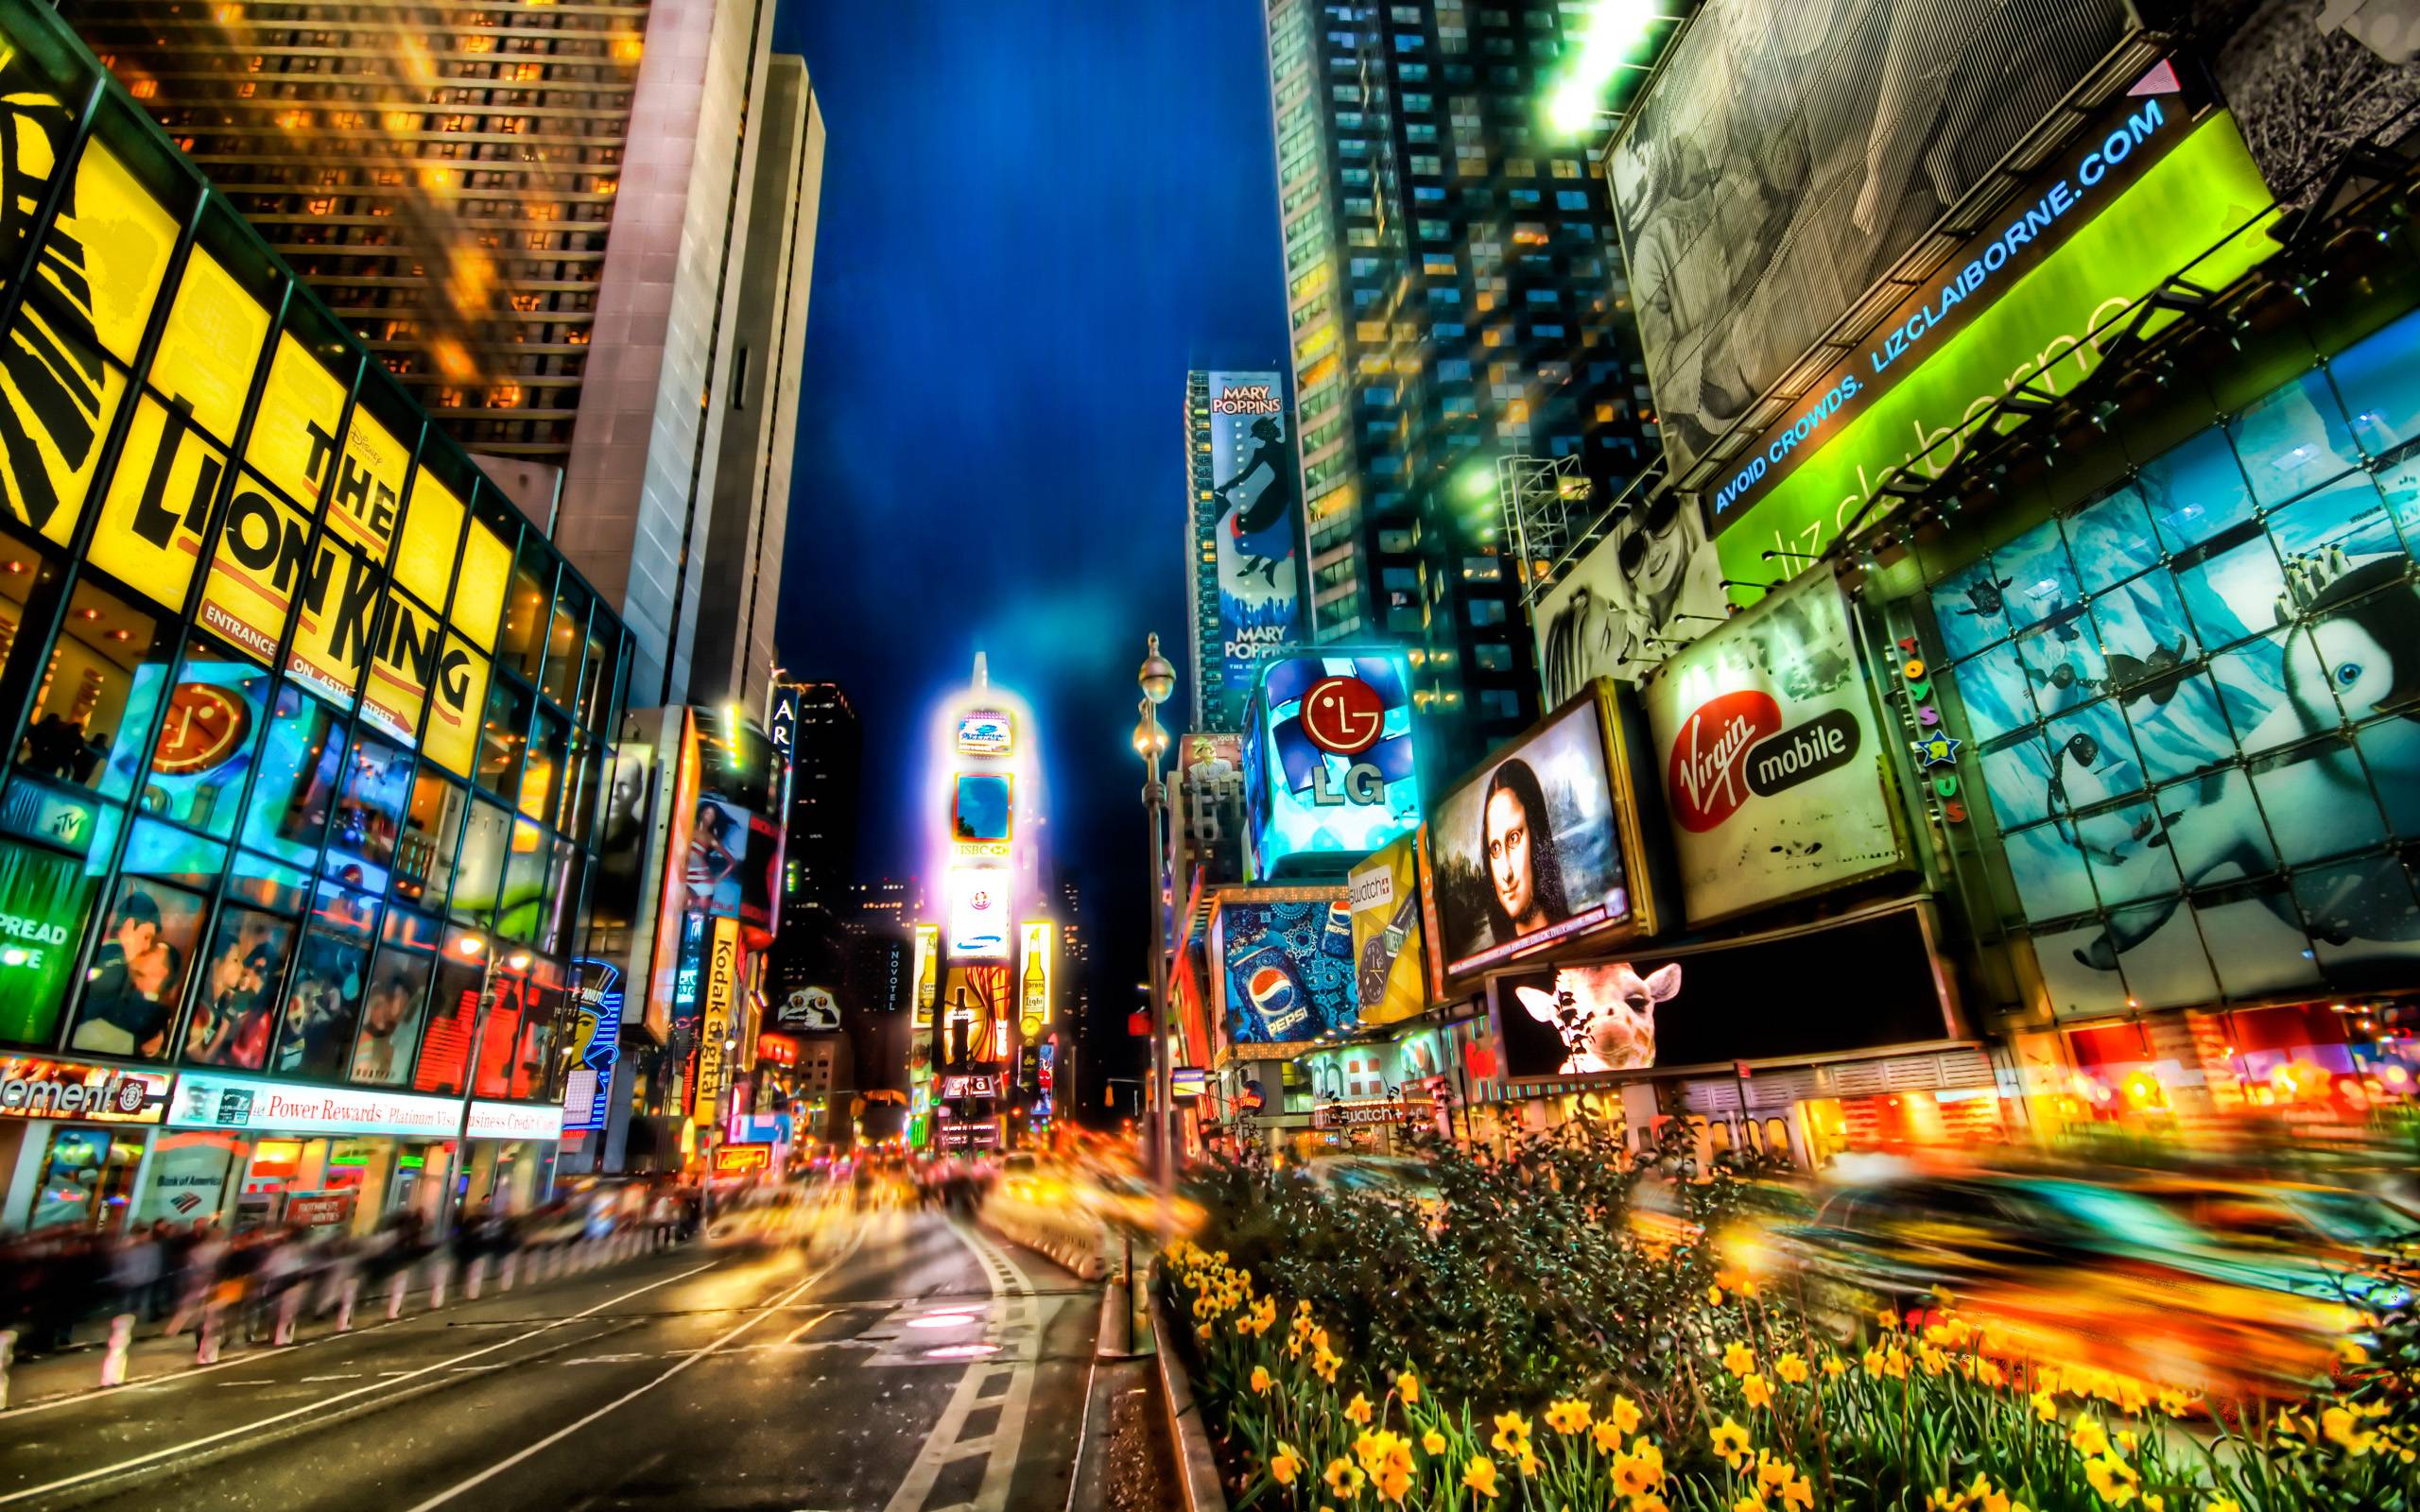 37 New York Times Square Iphone Wallpaper Foto Populer - Posts.id